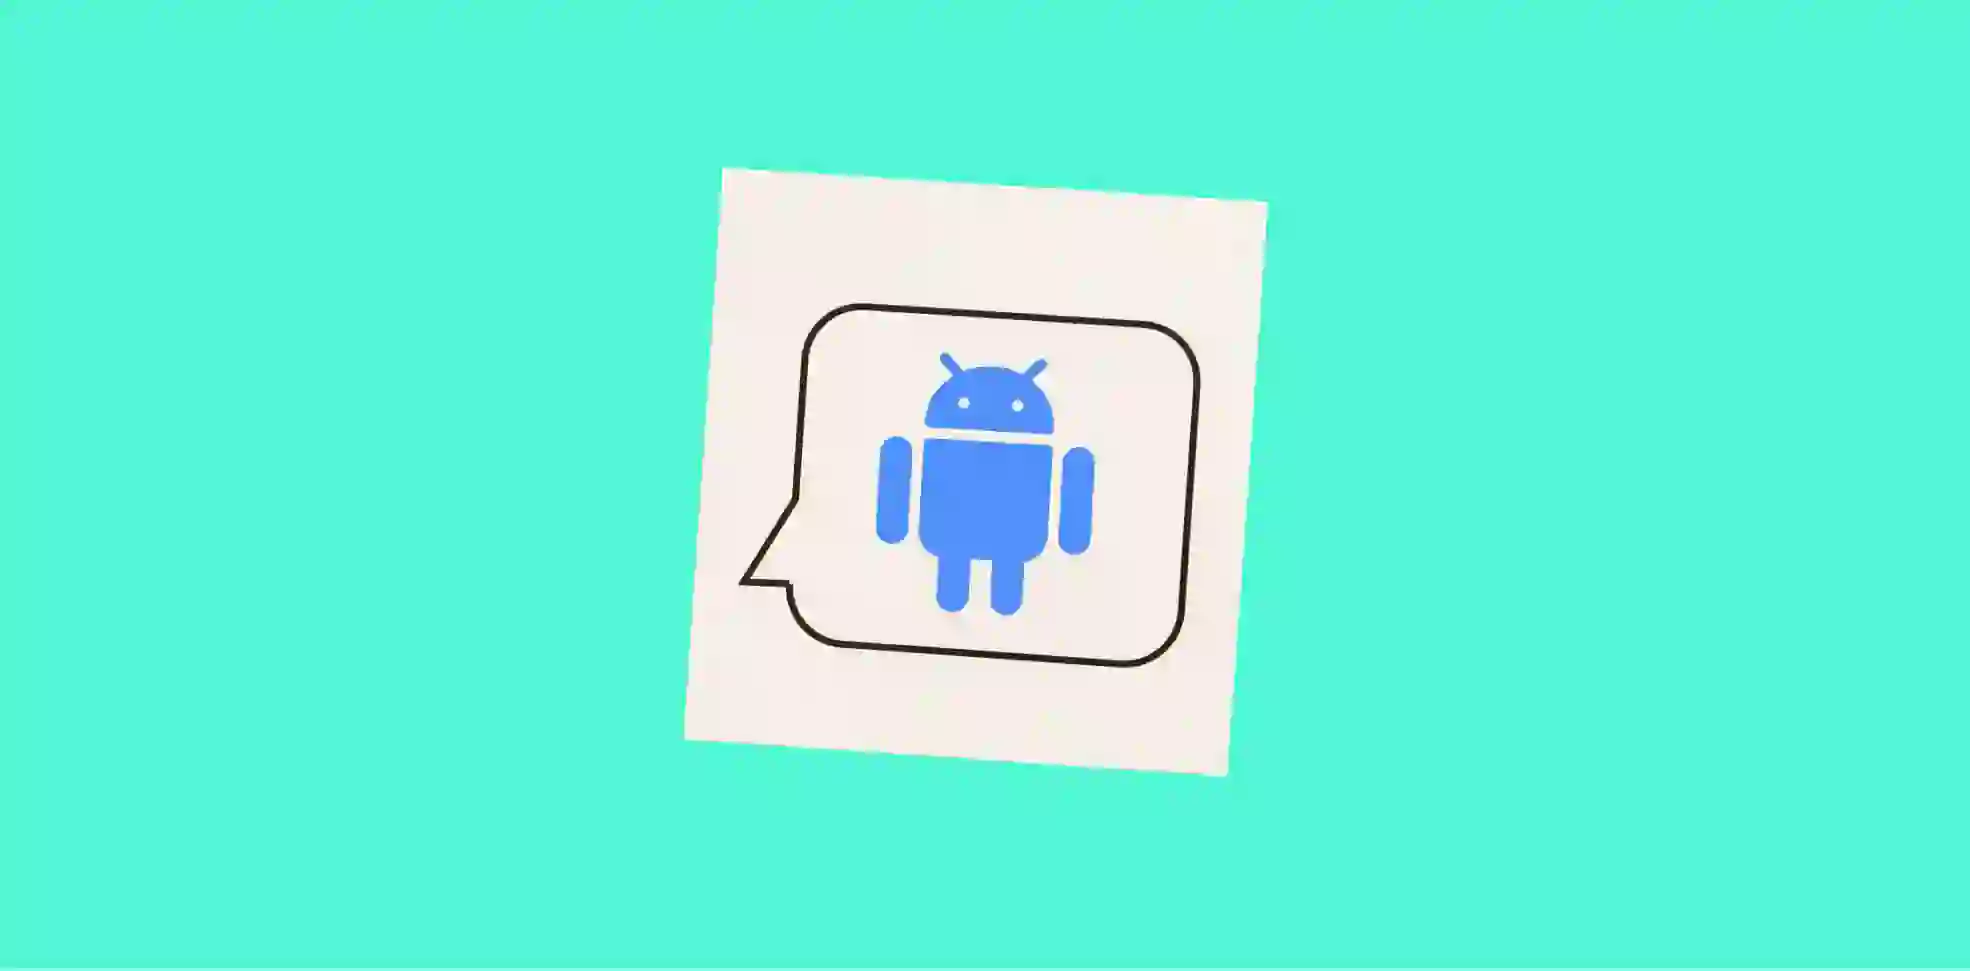 a symbol of Android on a sheet of paper